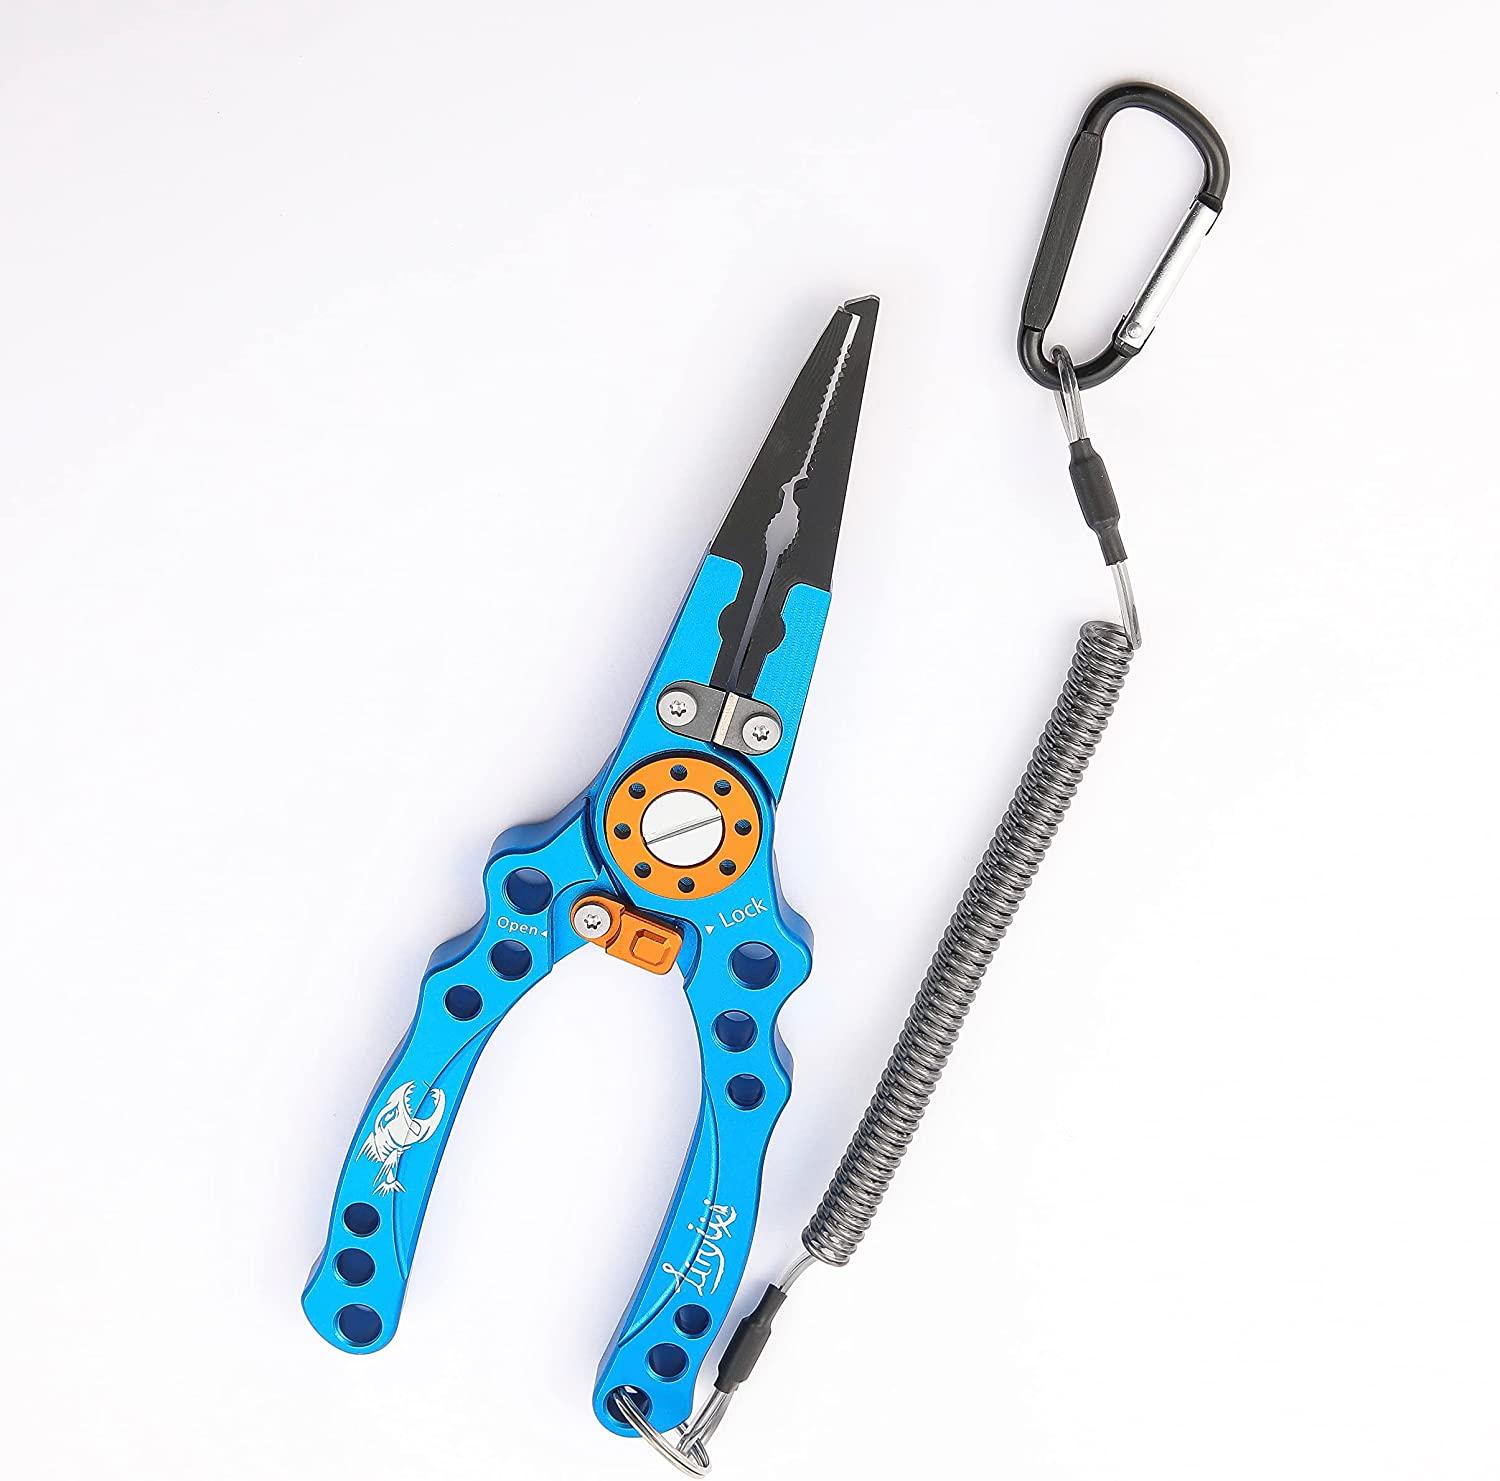 Fishing Pliers,Saltwater Resistant Fishing Accessories,Upgraded  Multi-Purpose Fishing Tools Set,Hook Remover Split Ring Pliers with Sheath  and Lanyard, Ice Fishing Gear,Fishing Gifts for Men Blue